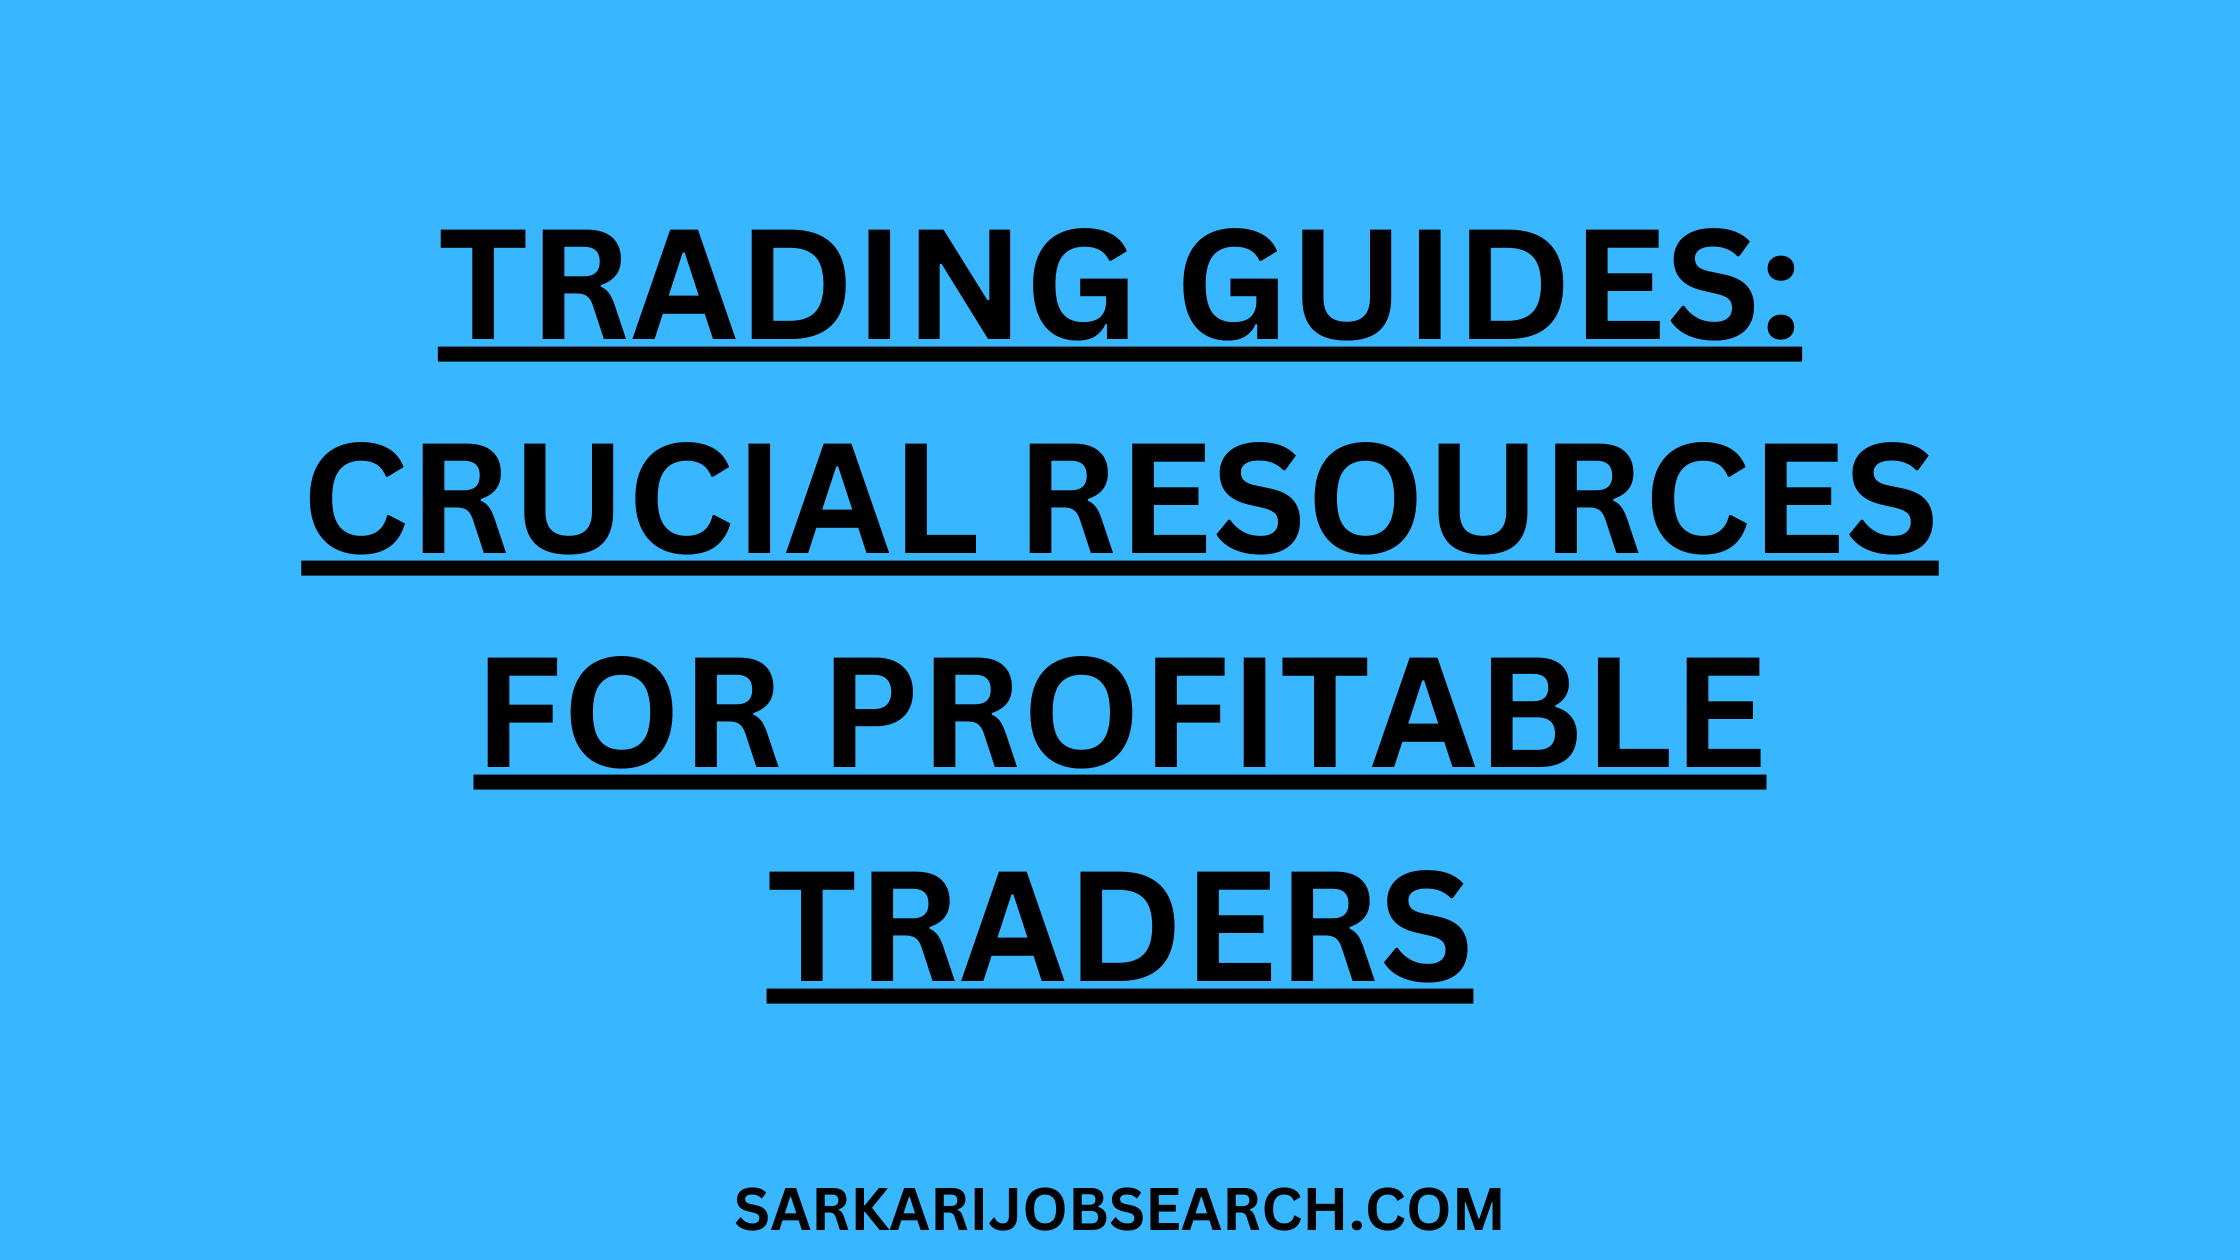 Trading Guides: Crucial Resources for Profitable Forex Traders